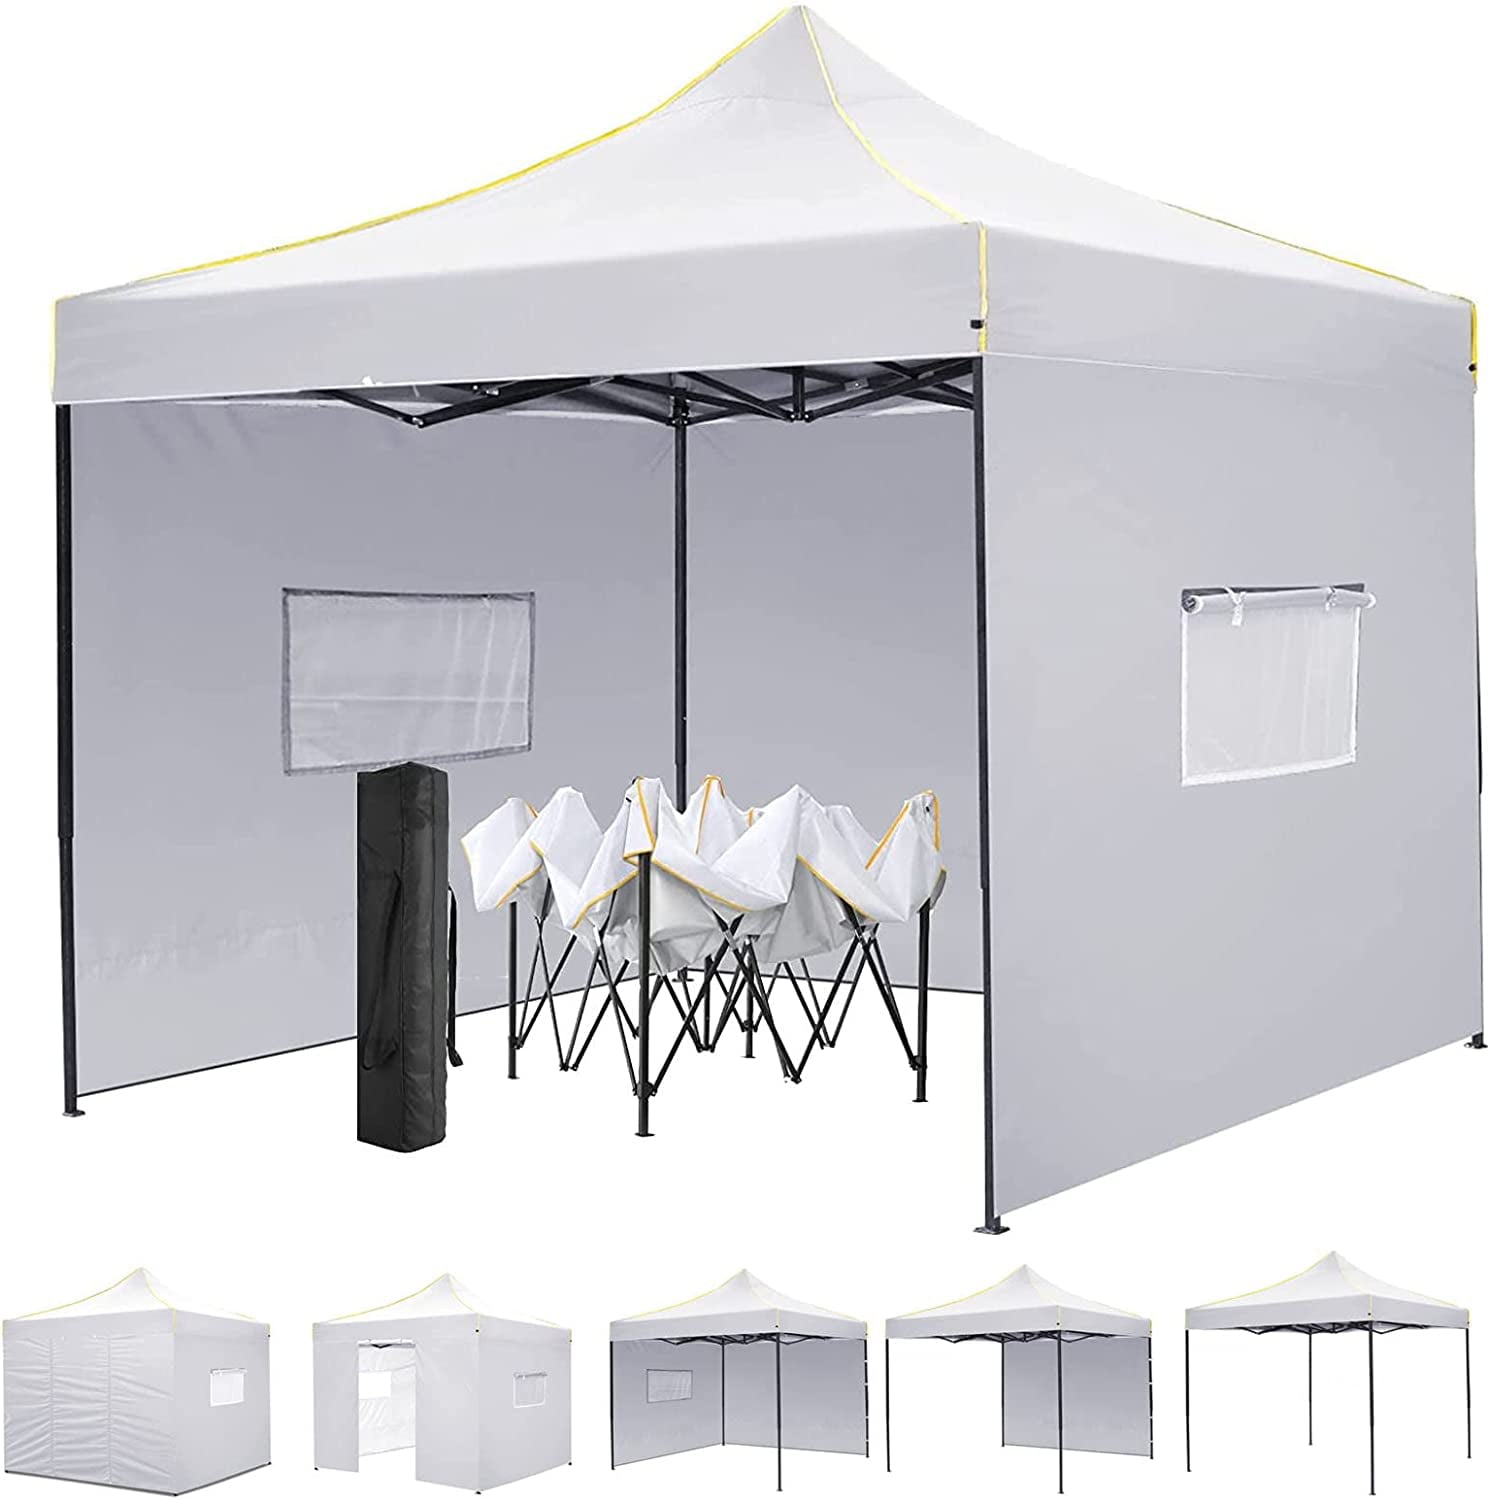 Likein 10x10Ft Pop Up Canopy Tent, Outdoor Camping Canopy with 4 Removable Sidewalls, Festival Tailgate Event Craft Show Instant Shelter with Carry Bag - Warehouse Clearance Gray